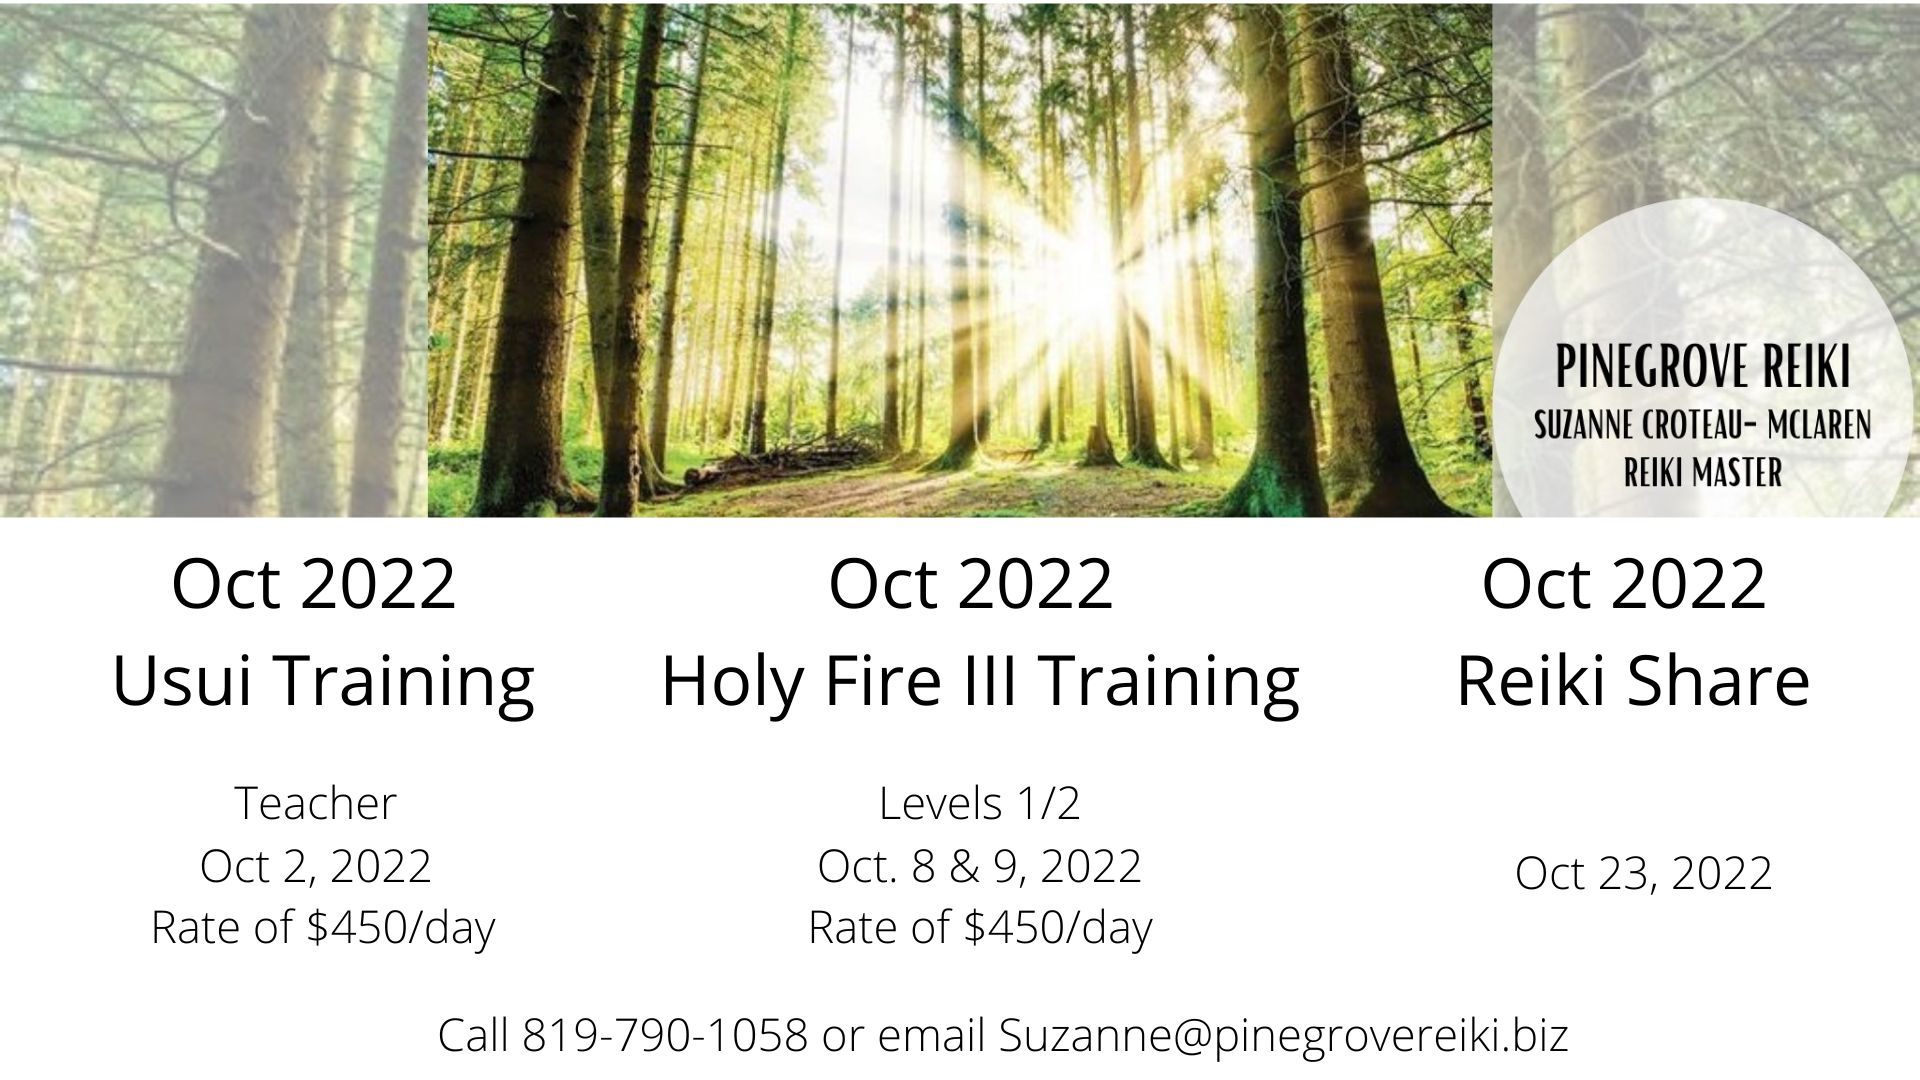  Pinegrove Reiki Holly Fire III Level 1/2 Reiki Training with Suzanne Croteau